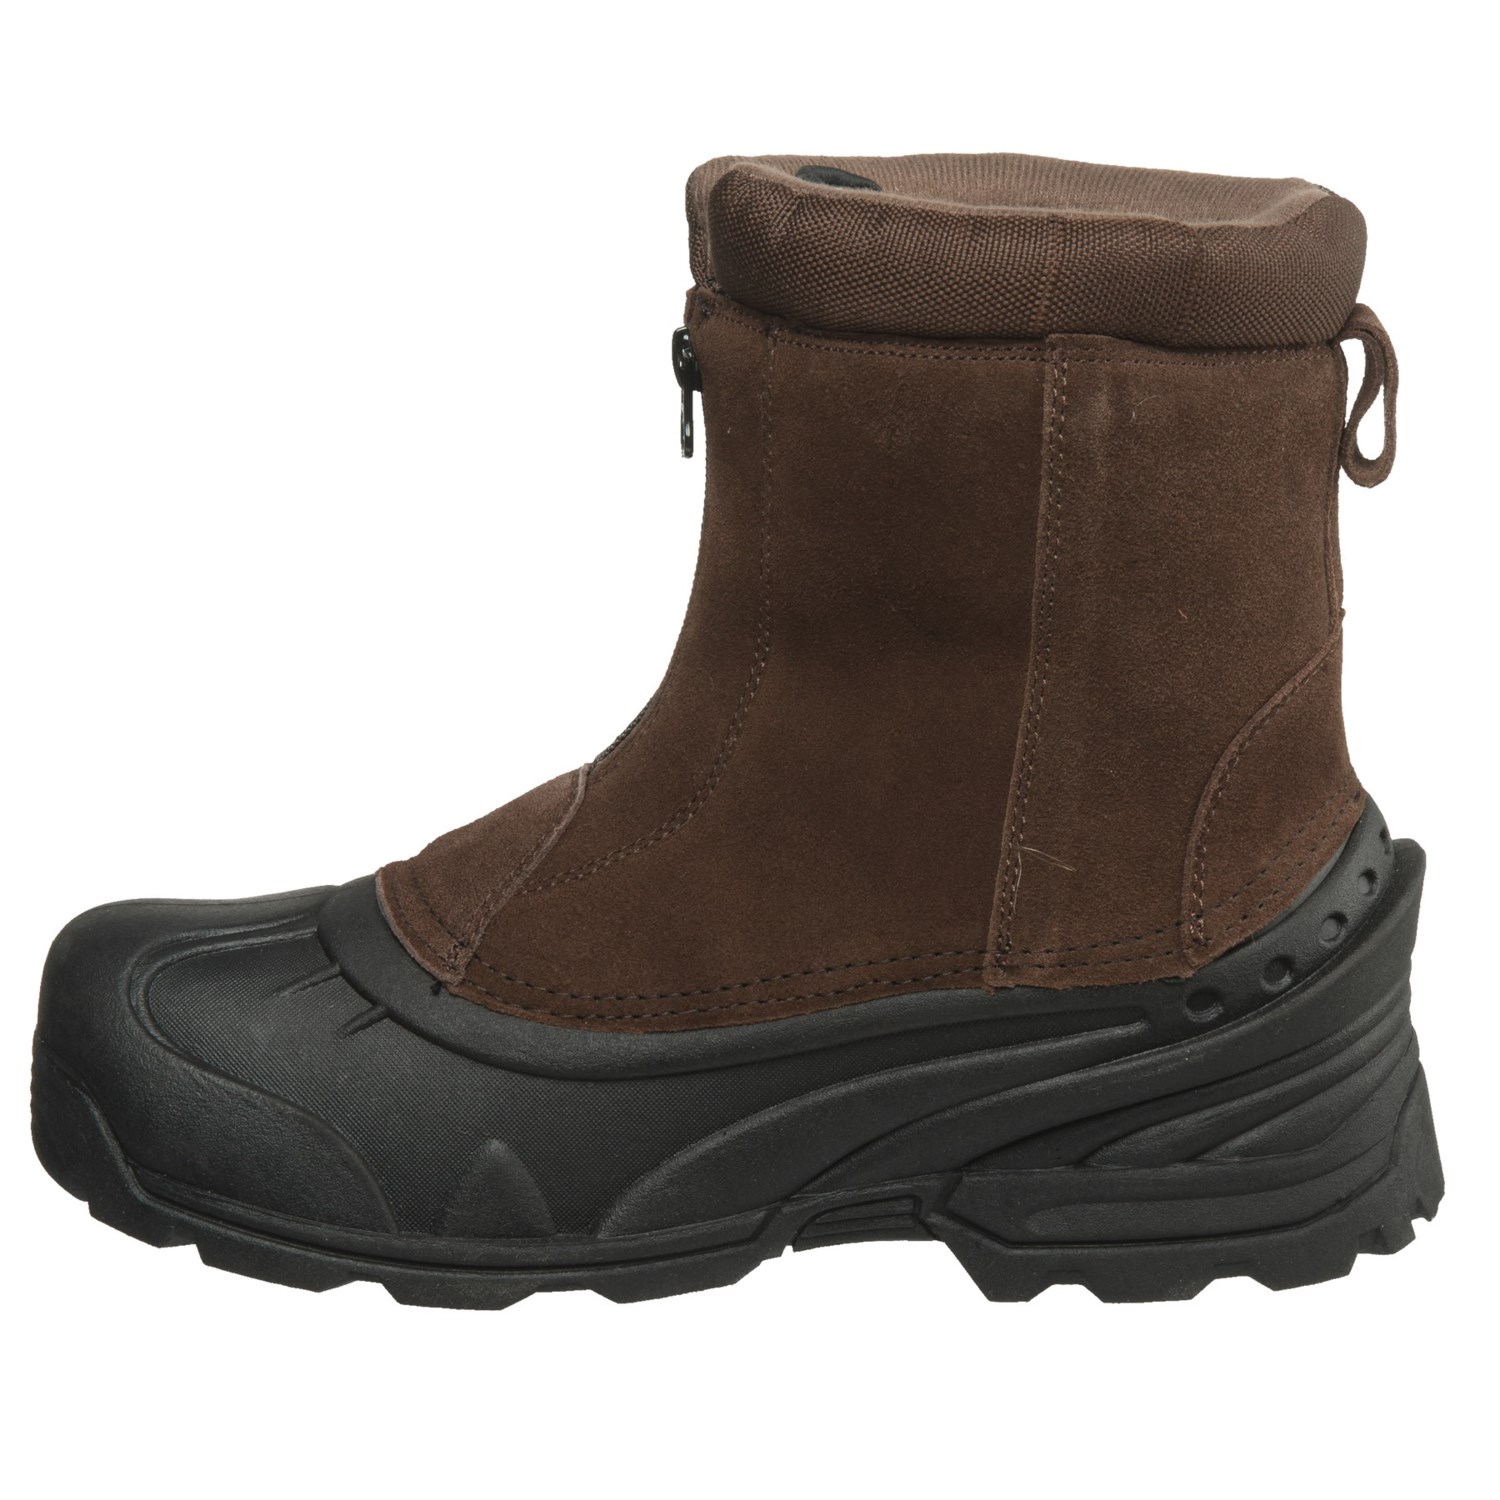 Itasca Brunswick Winter Pac Boots (For Men) - Save 68%